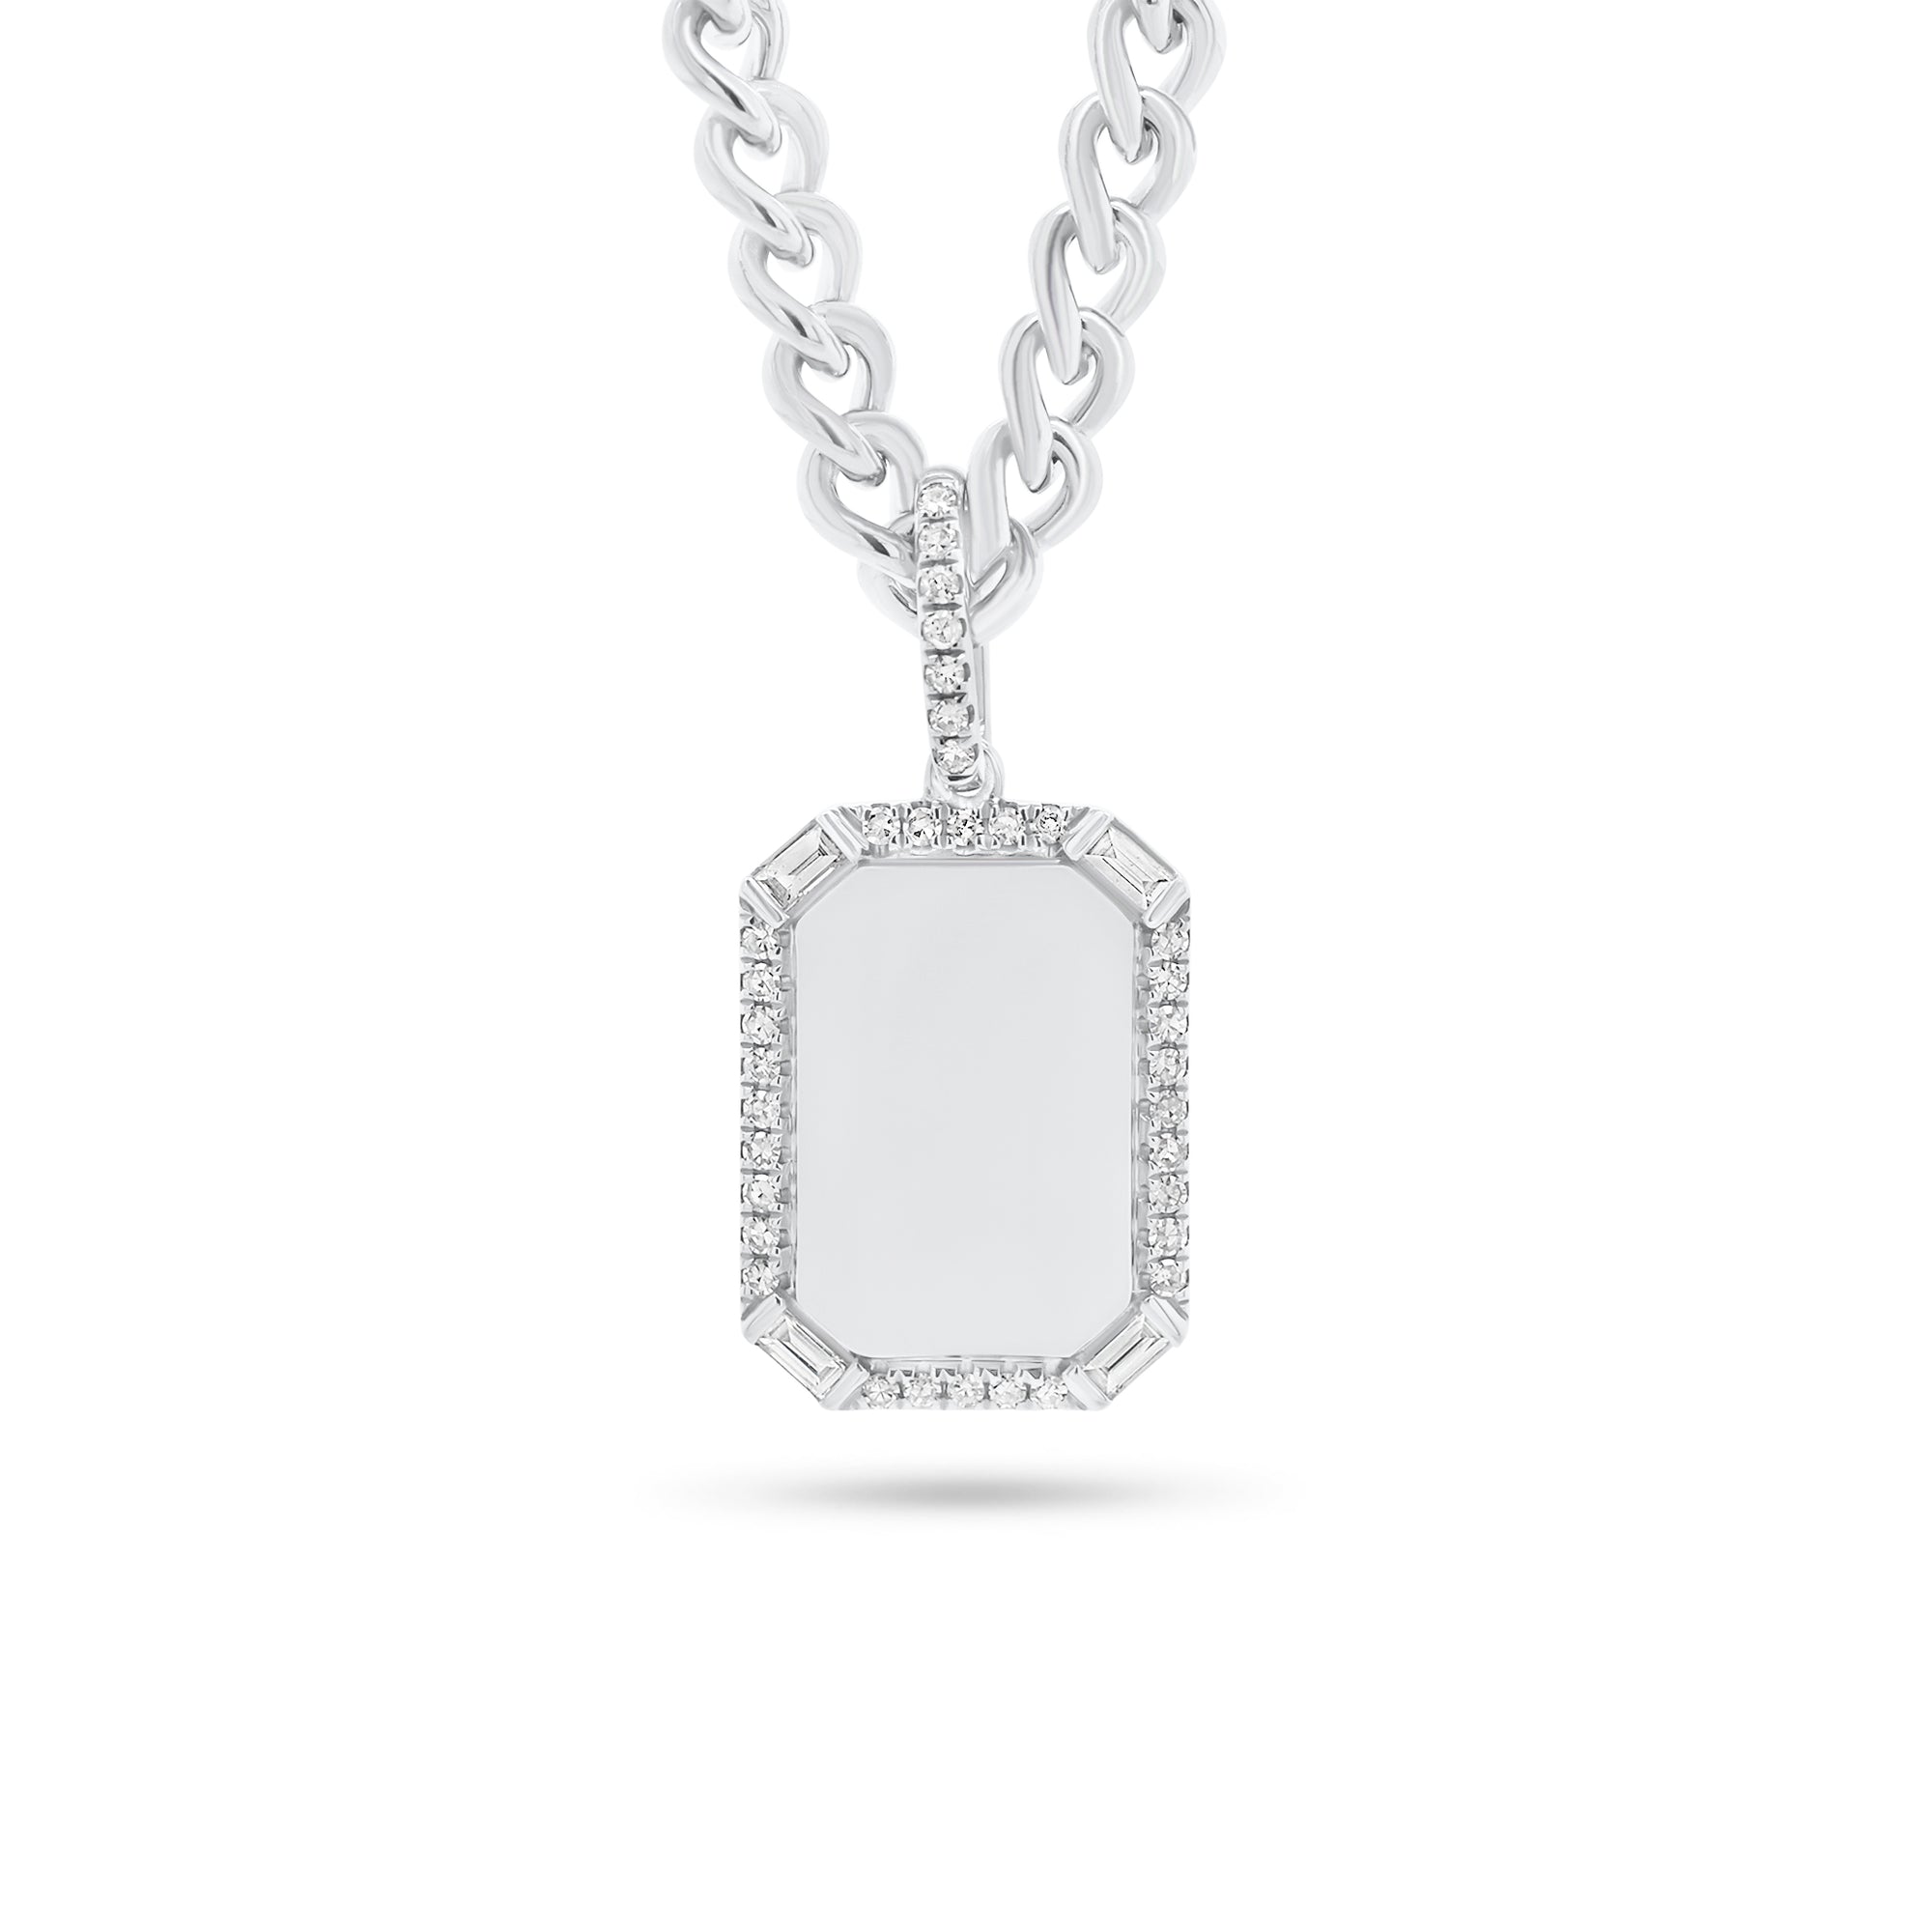 Pave & Baguette Diamond Dog Tag Pendant -14K yellow gold weighing 2.77 grams  -39 round diamonds weighing 0.12 carats  -4 slim baguettes weighing 0.20 carats